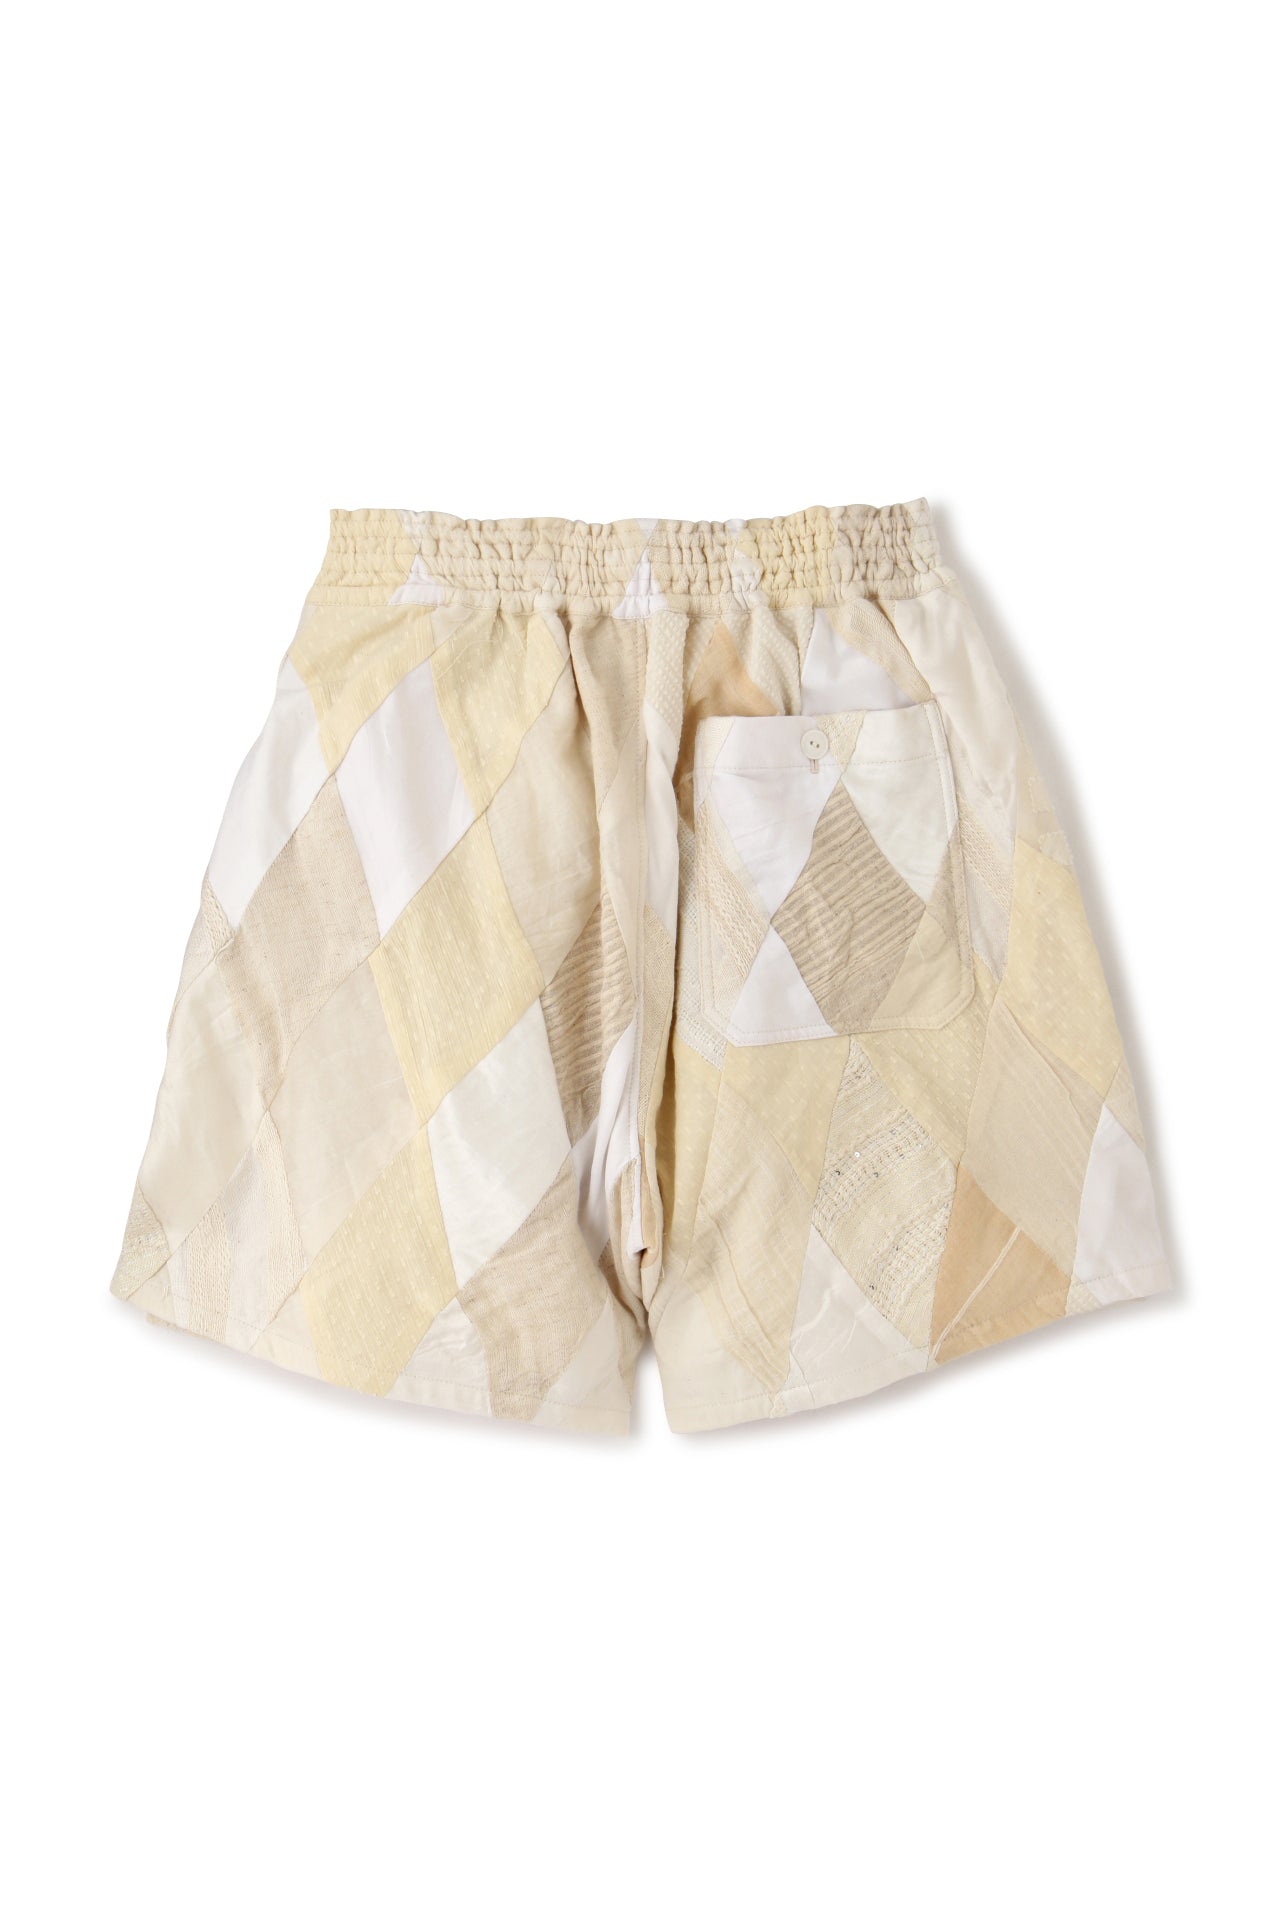 PATCHWORK WRAPPING SHORT PANTS - Leftover indian khadi -